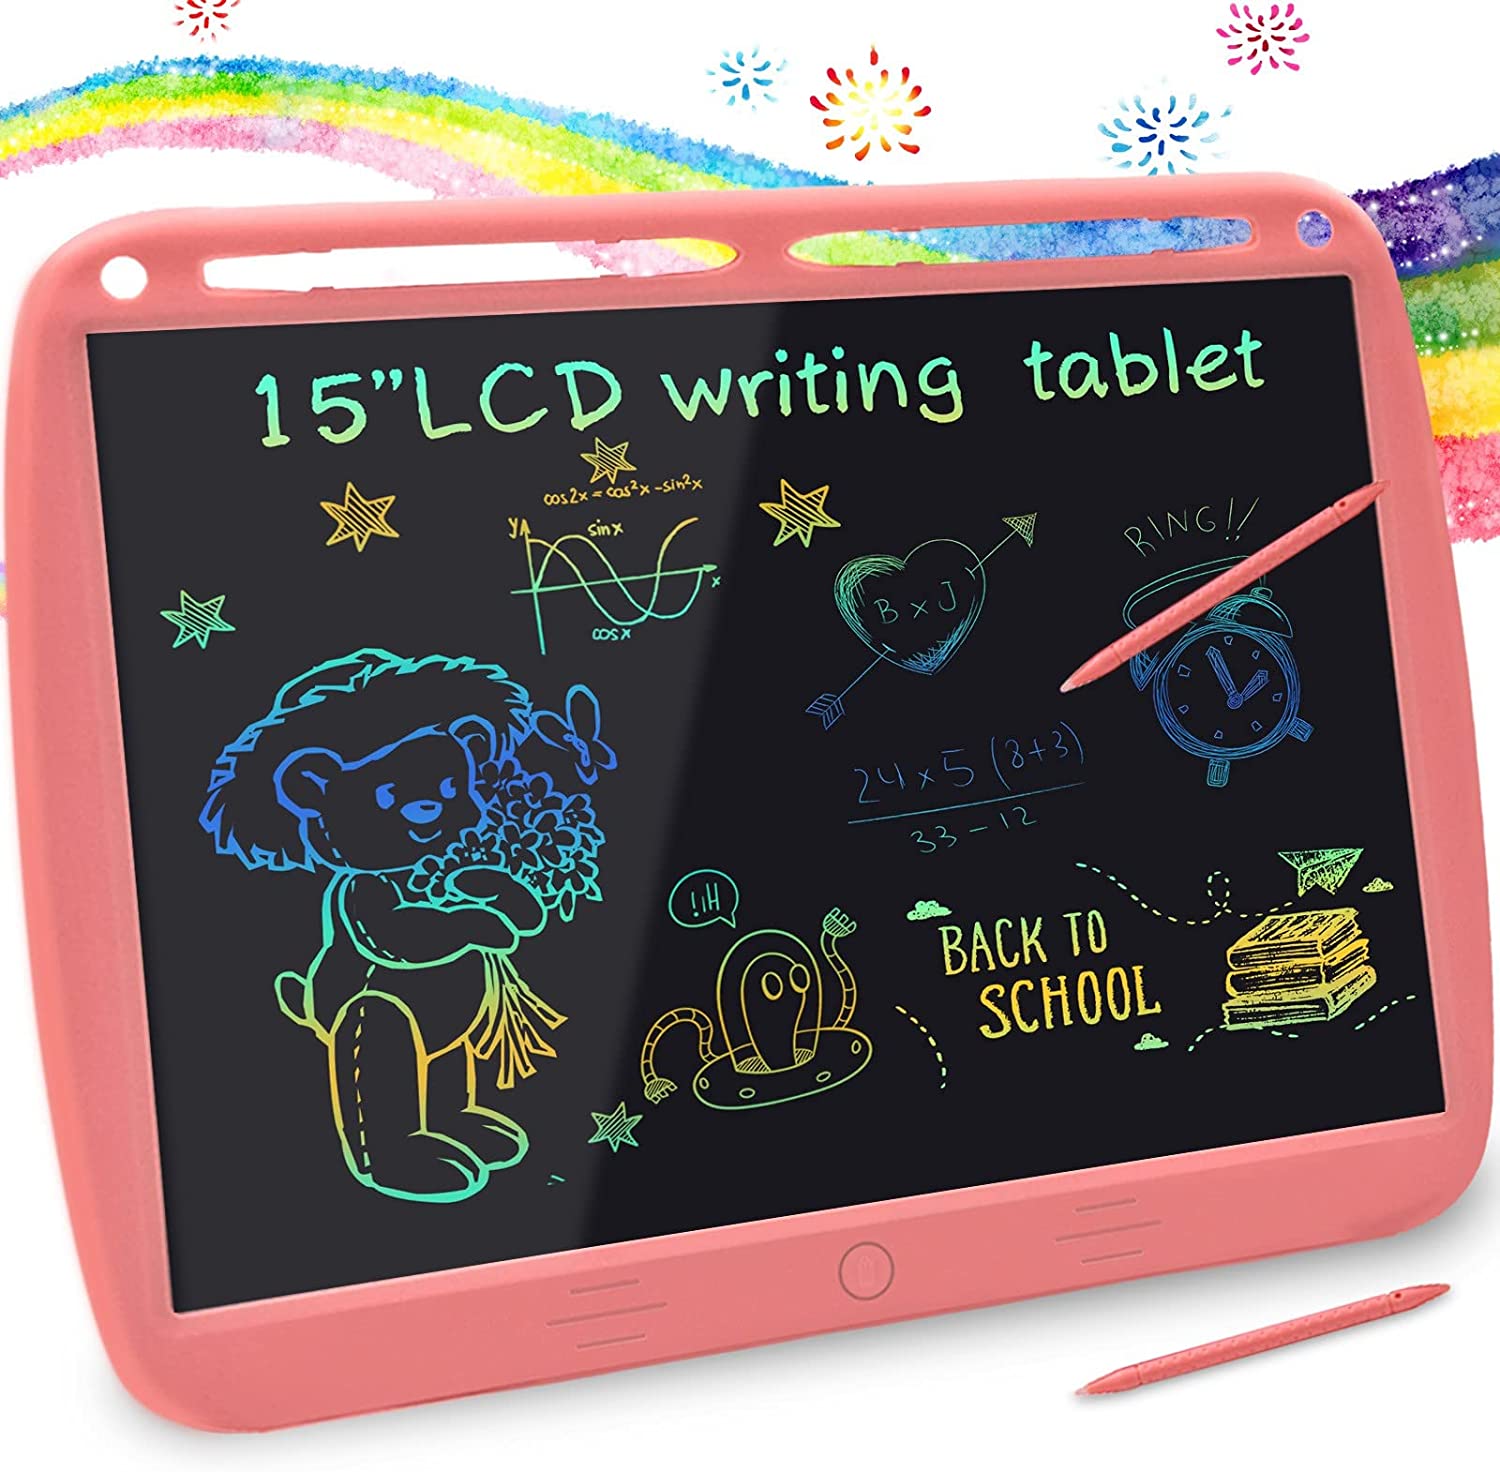 School and Office Writing Handwriting Pads,Handwriting Paper Drawing Tablet Gift for Kids and Adults at Home Tangxi Handwriting Board 15 inch LCD Writing Board 